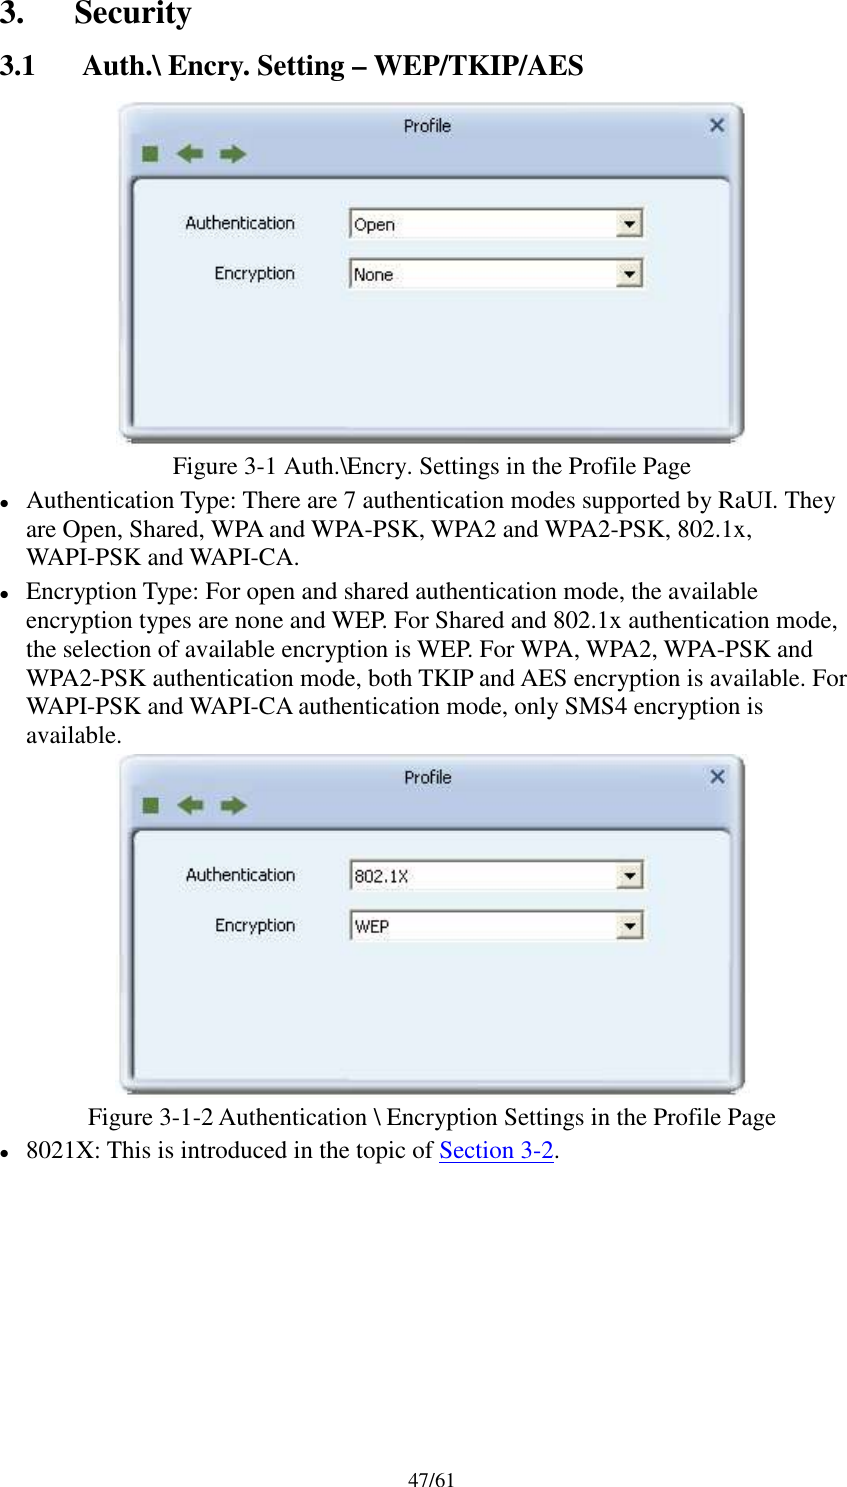 47/613. Security3.1 Auth.\ Encry. Setting – WEP/TKIP/AESFigure 3-1 Auth.\Encry. Settings in the Profile PageAuthentication Type: There are 7 authentication modes supported by RaUI. Theyare Open, Shared, WPA and WPA-PSK, WPA2 and WPA2-PSK, 802.1x,WAPI-PSK and WAPI-CA.Encryption Type: For open and shared authentication mode, the availableencryption types are none and WEP. For Shared and 802.1x authentication mode,the selection of available encryption is WEP. For WPA, WPA2, WPA-PSK andWPA2-PSK authentication mode, both TKIP and AES encryption is available. ForWAPI-PSK and WAPI-CA authentication mode, only SMS4 encryption isavailable.Figure 3-1-2 Authentication \ Encryption Settings in the Profile Page8021X: This is introduced in the topic of Section 3-2.